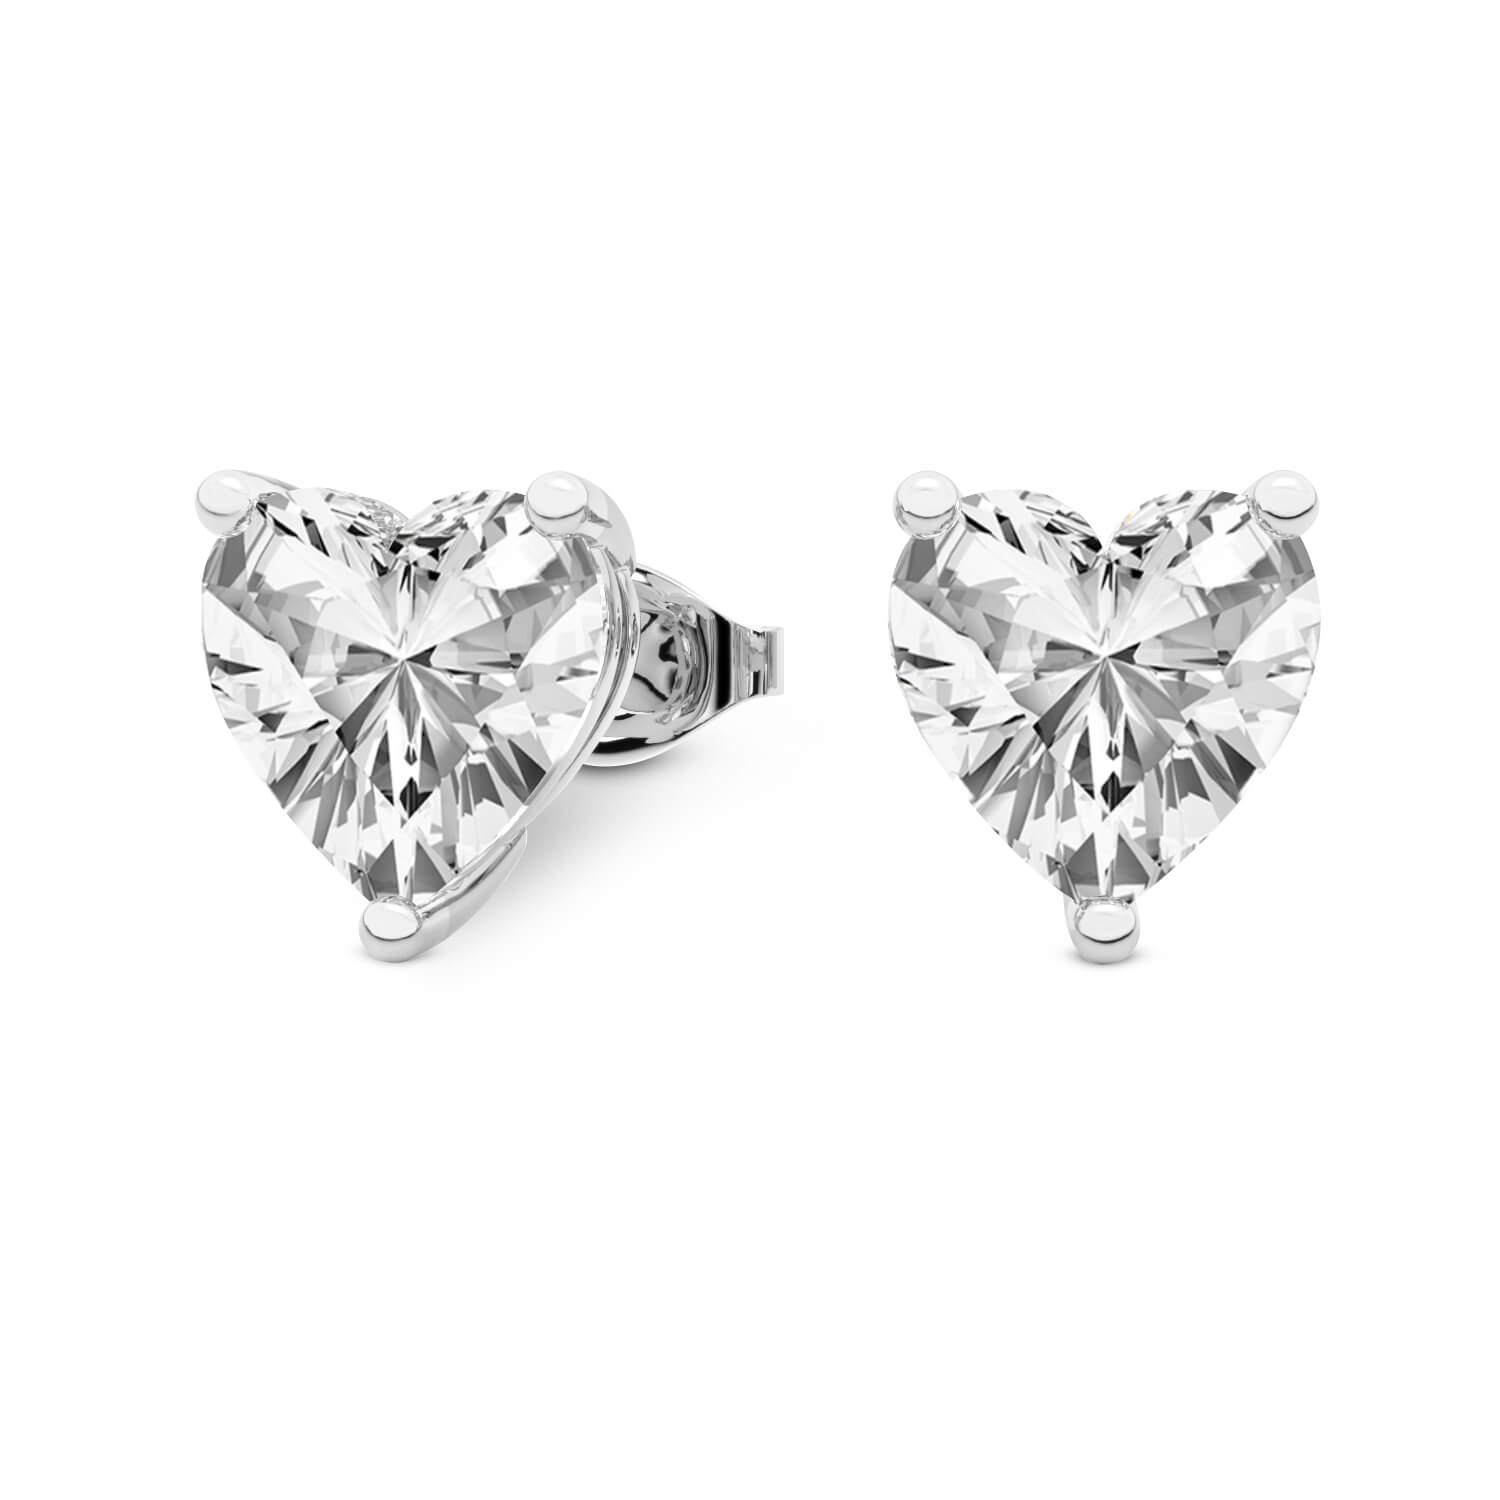 3 Prong Heart Lab Diamond Stud Earrings white gold earring, small right view